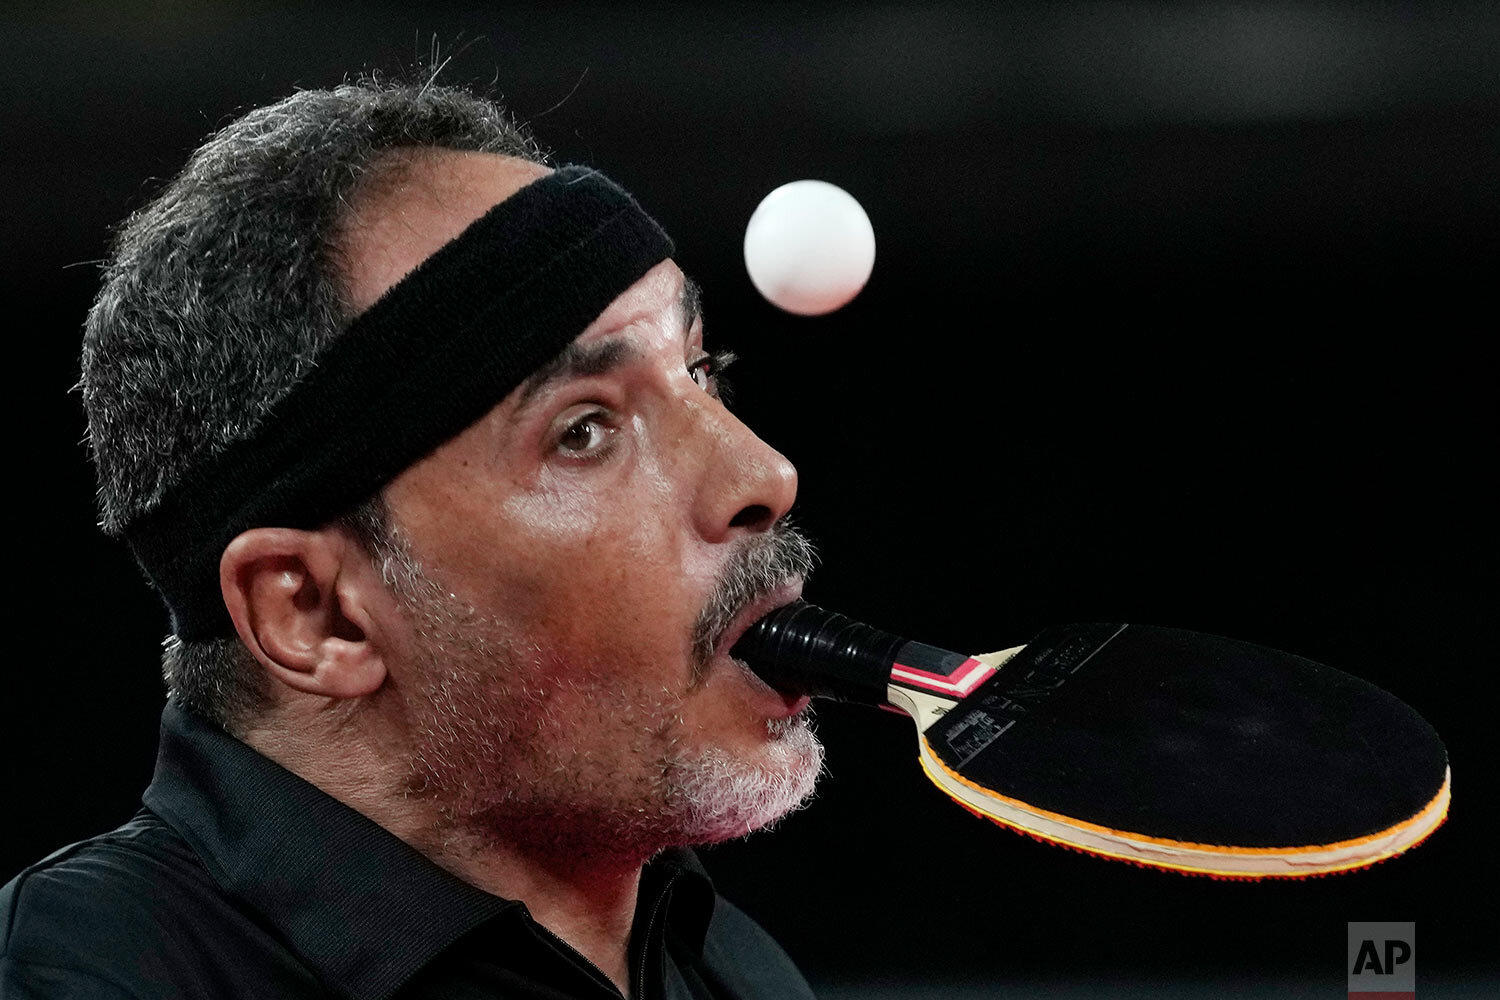  Ibrahim Hamadtou of Egypt plays against Park Hong-kyu of South Korea in Class 6, Group E of men's table tennis at the Tokyo 2020 Paralympic Games Wednesday, Aug. 25, 2021, in Tokyo. (AP Photo/Eugene Hoshiko) 